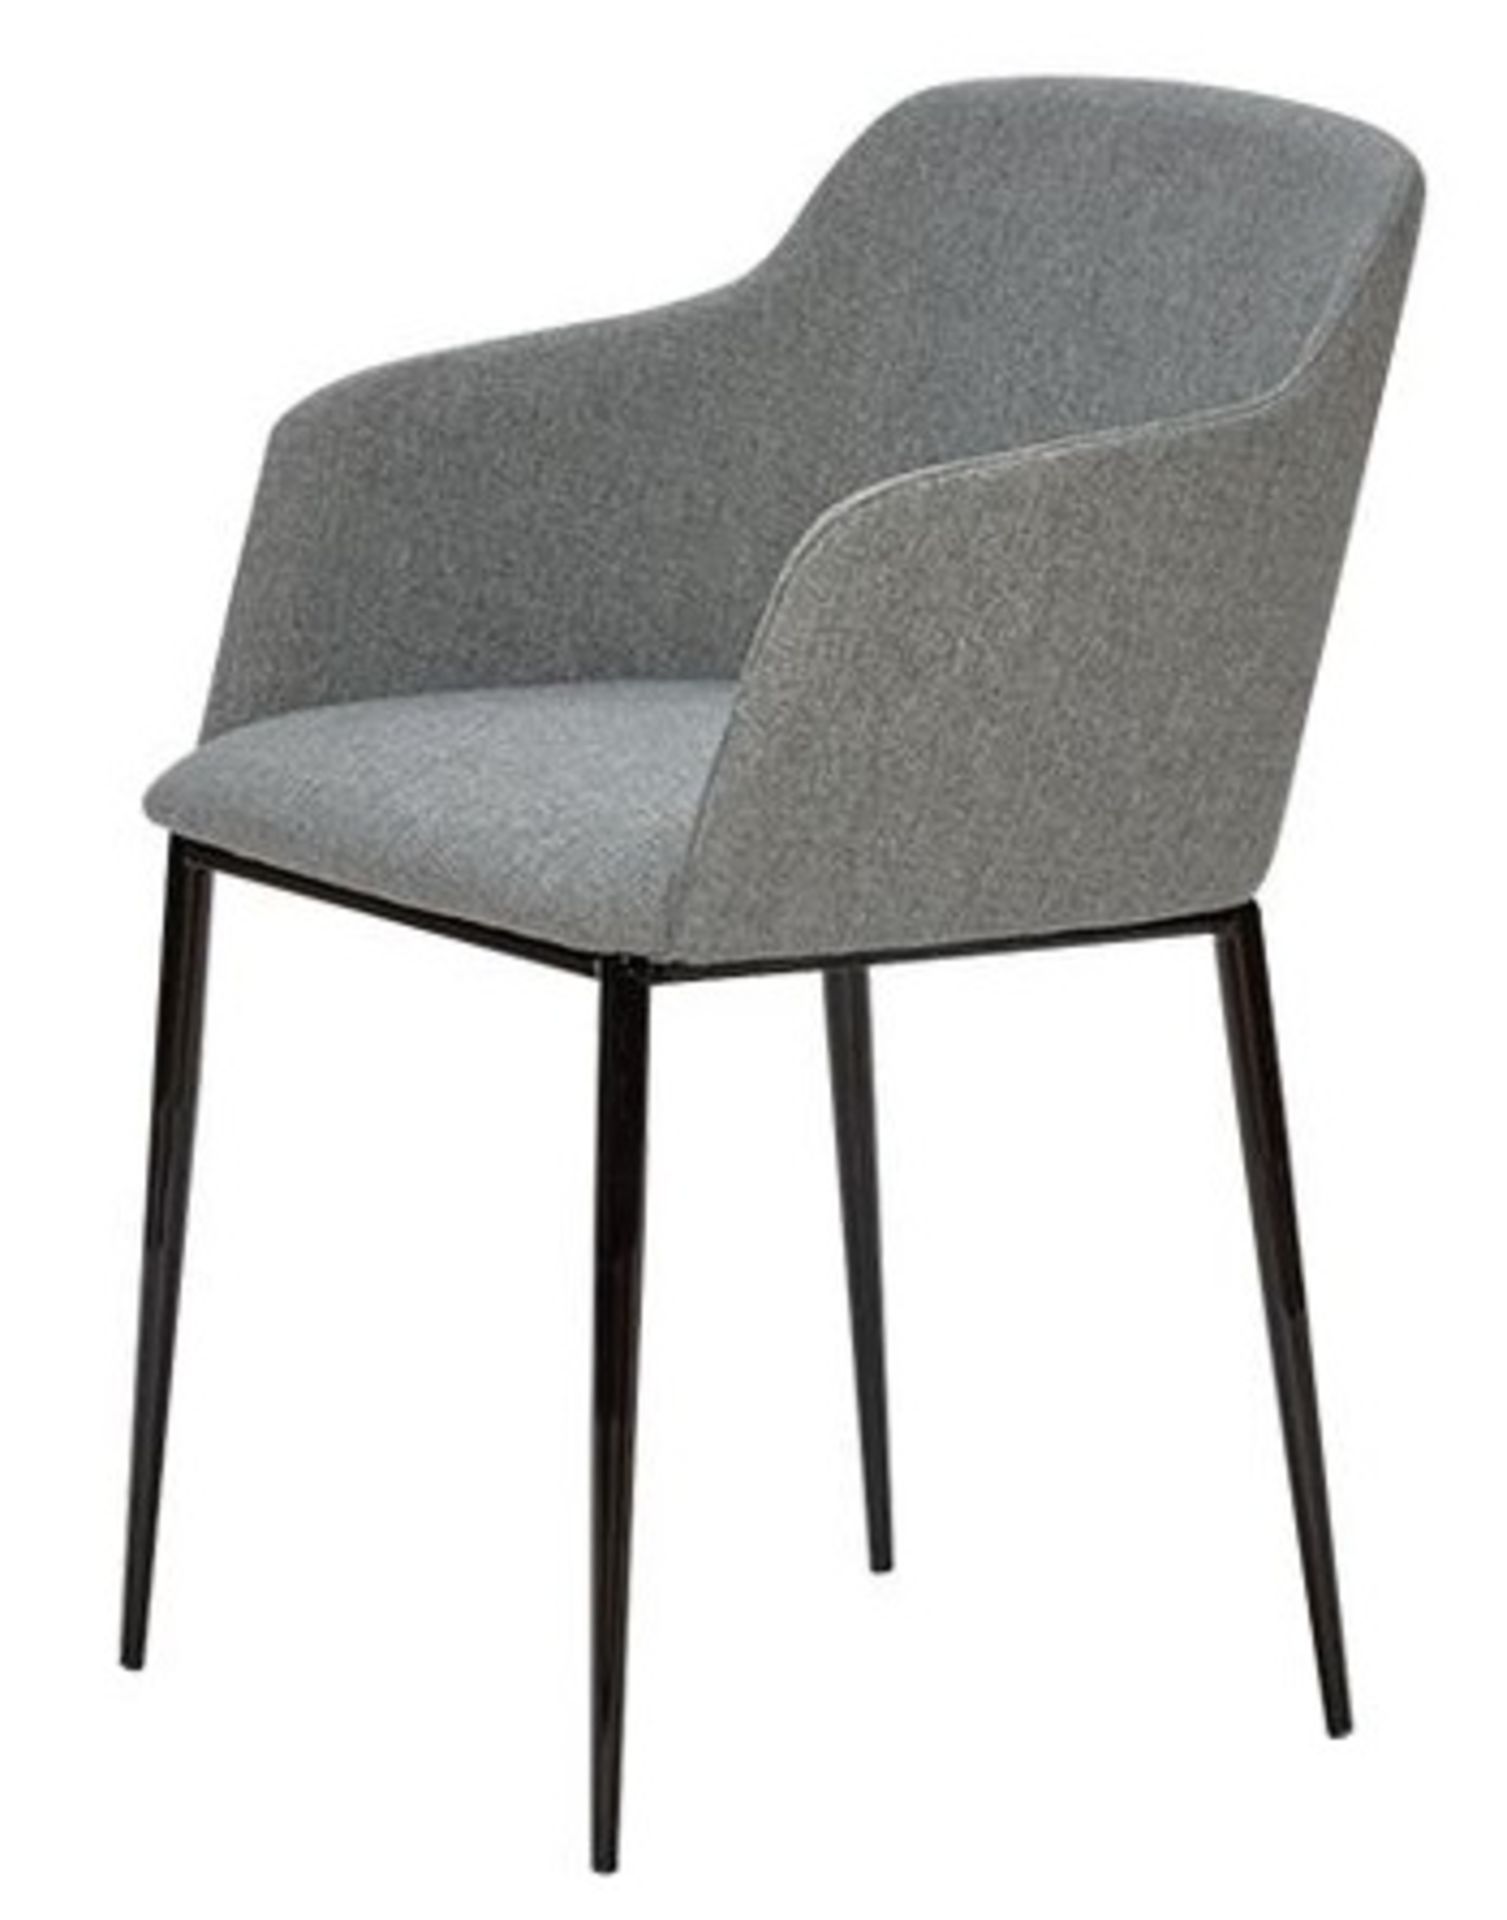 6 x FLANDERS Upholstered Contemporary Dining Chairs In Grey Fabric, With Slender Black Metal - Image 3 of 3